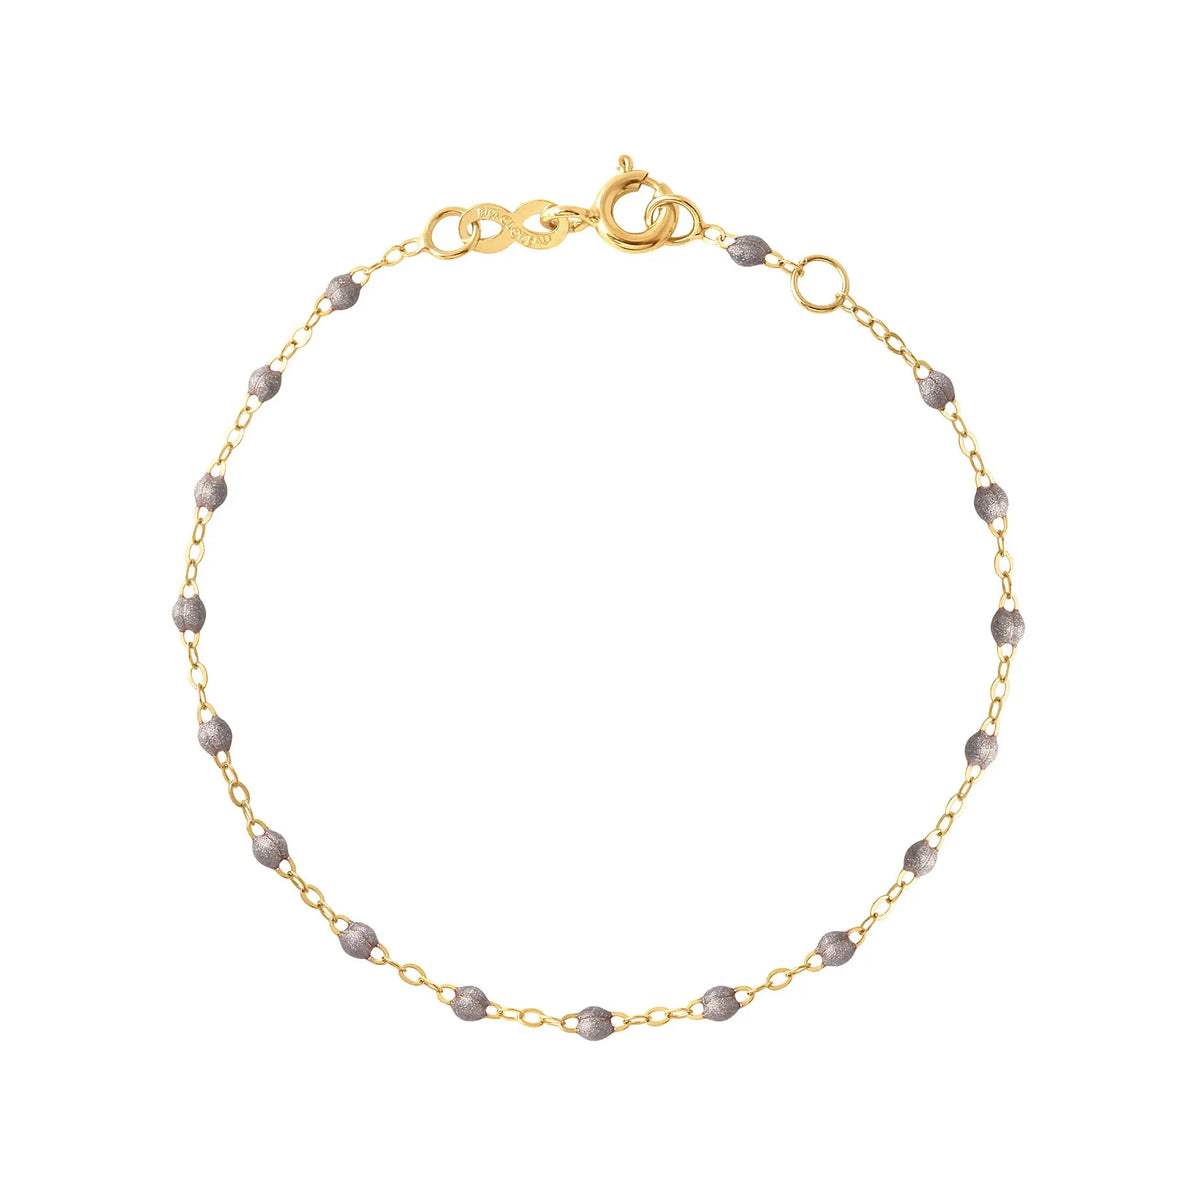 The Classic Gigi bracelet by gigi CLOZEAU features 18K Yellow Gold, and unique Gigi jewels for a simple, everyday look.   Each jewel is unique, artisanally made in their family-owned workshop. 18K yellow gold and resin. The bracelet measures 6.7 inches with adjustable clasp at 6.3 inches.